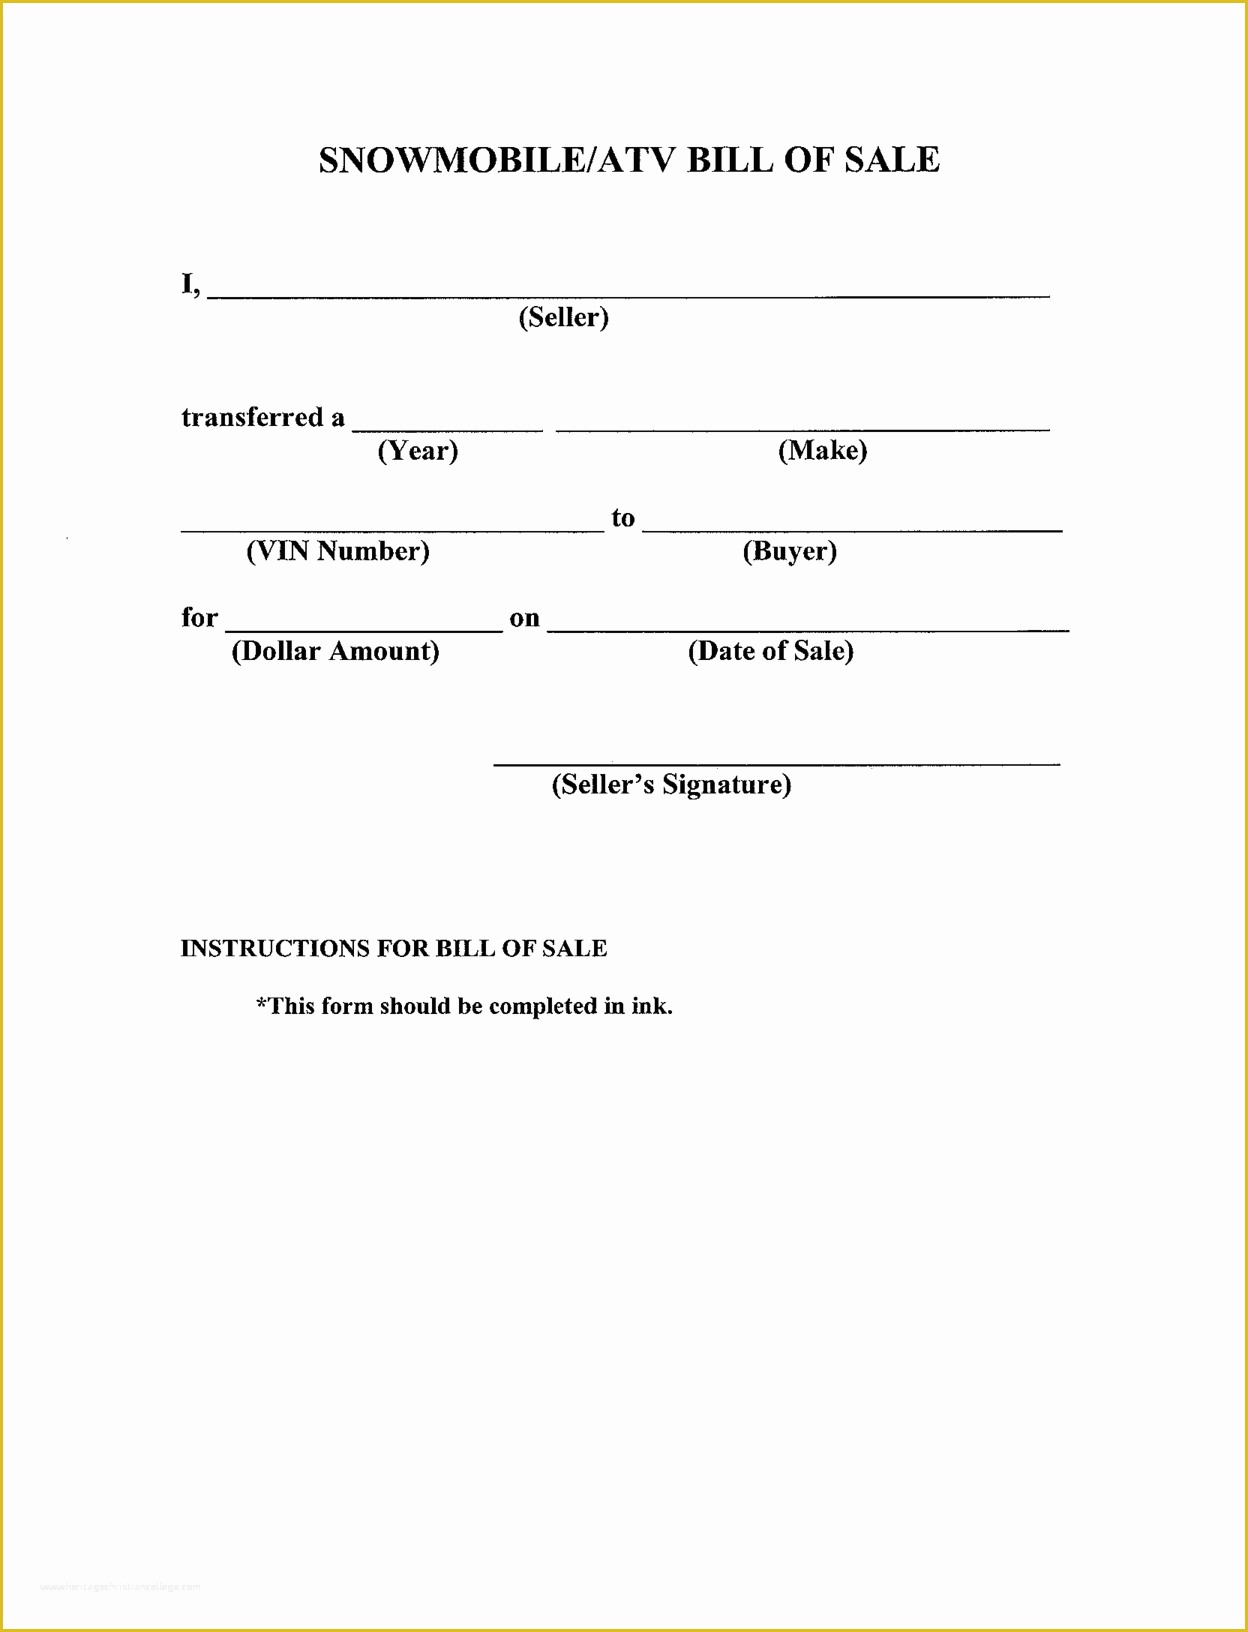 Free Online Bill Of Sale Template Of Free Printable Bill Of Sale Templates form Generic